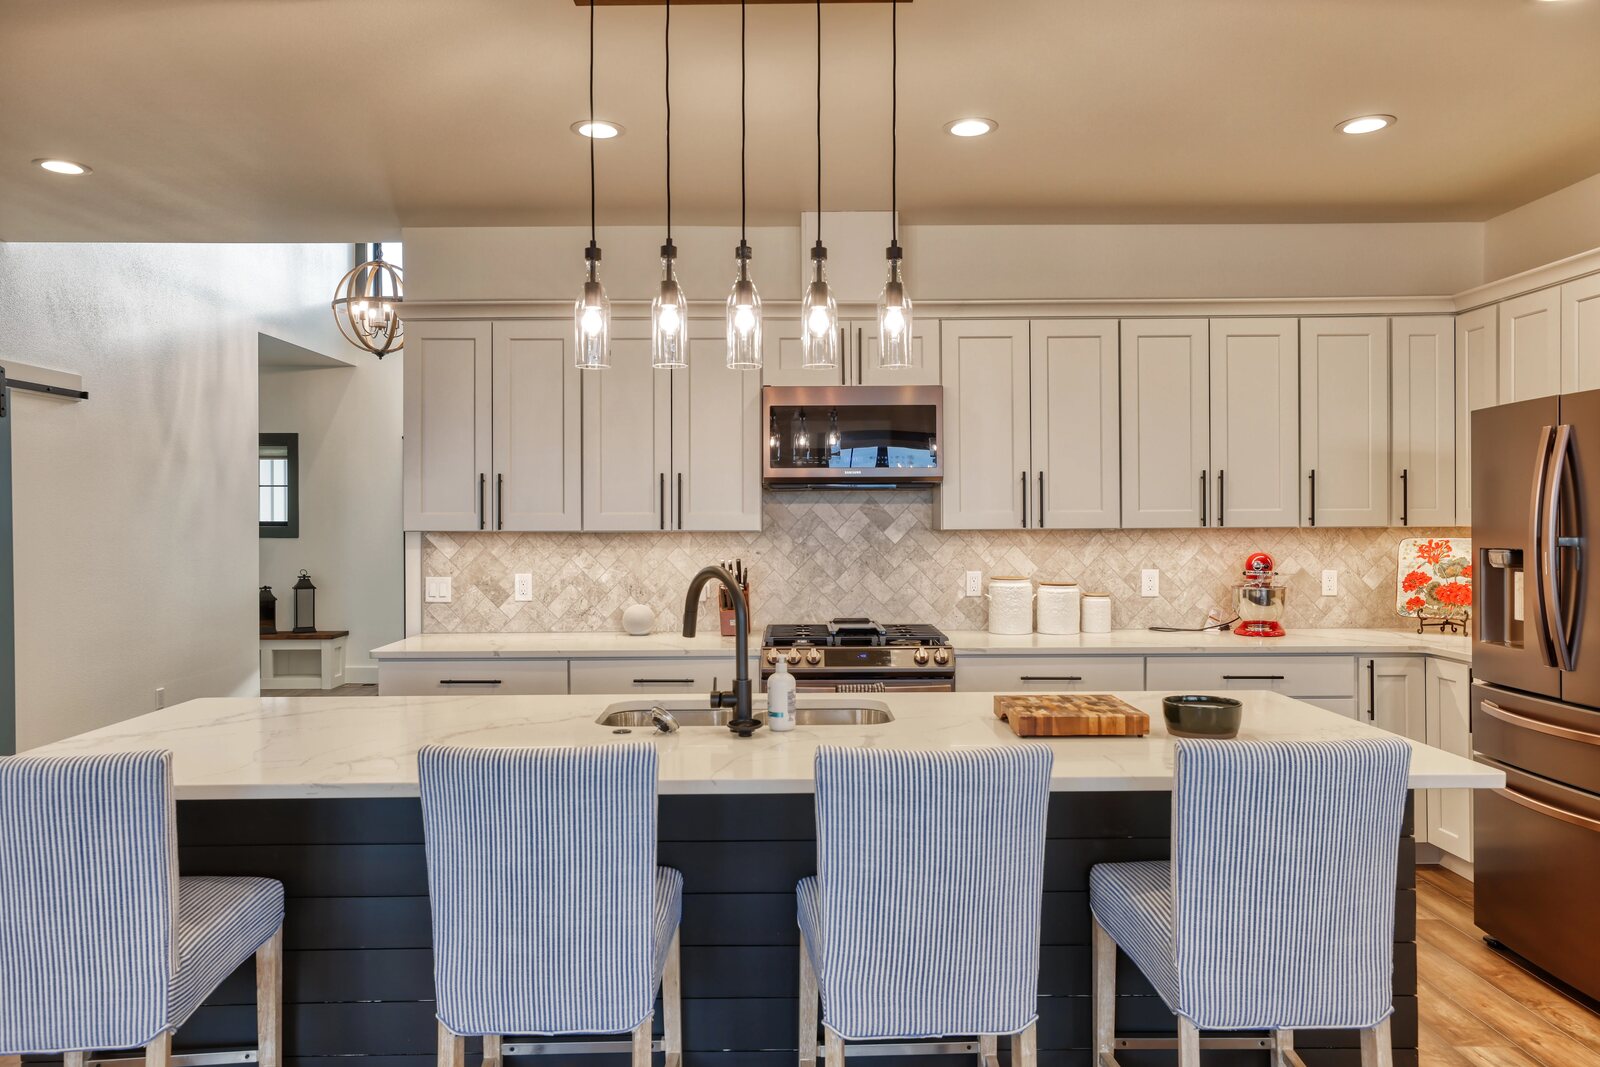 custom home kitchen with pendant lighting bar chairs at island and tiled backsplash in wyoming